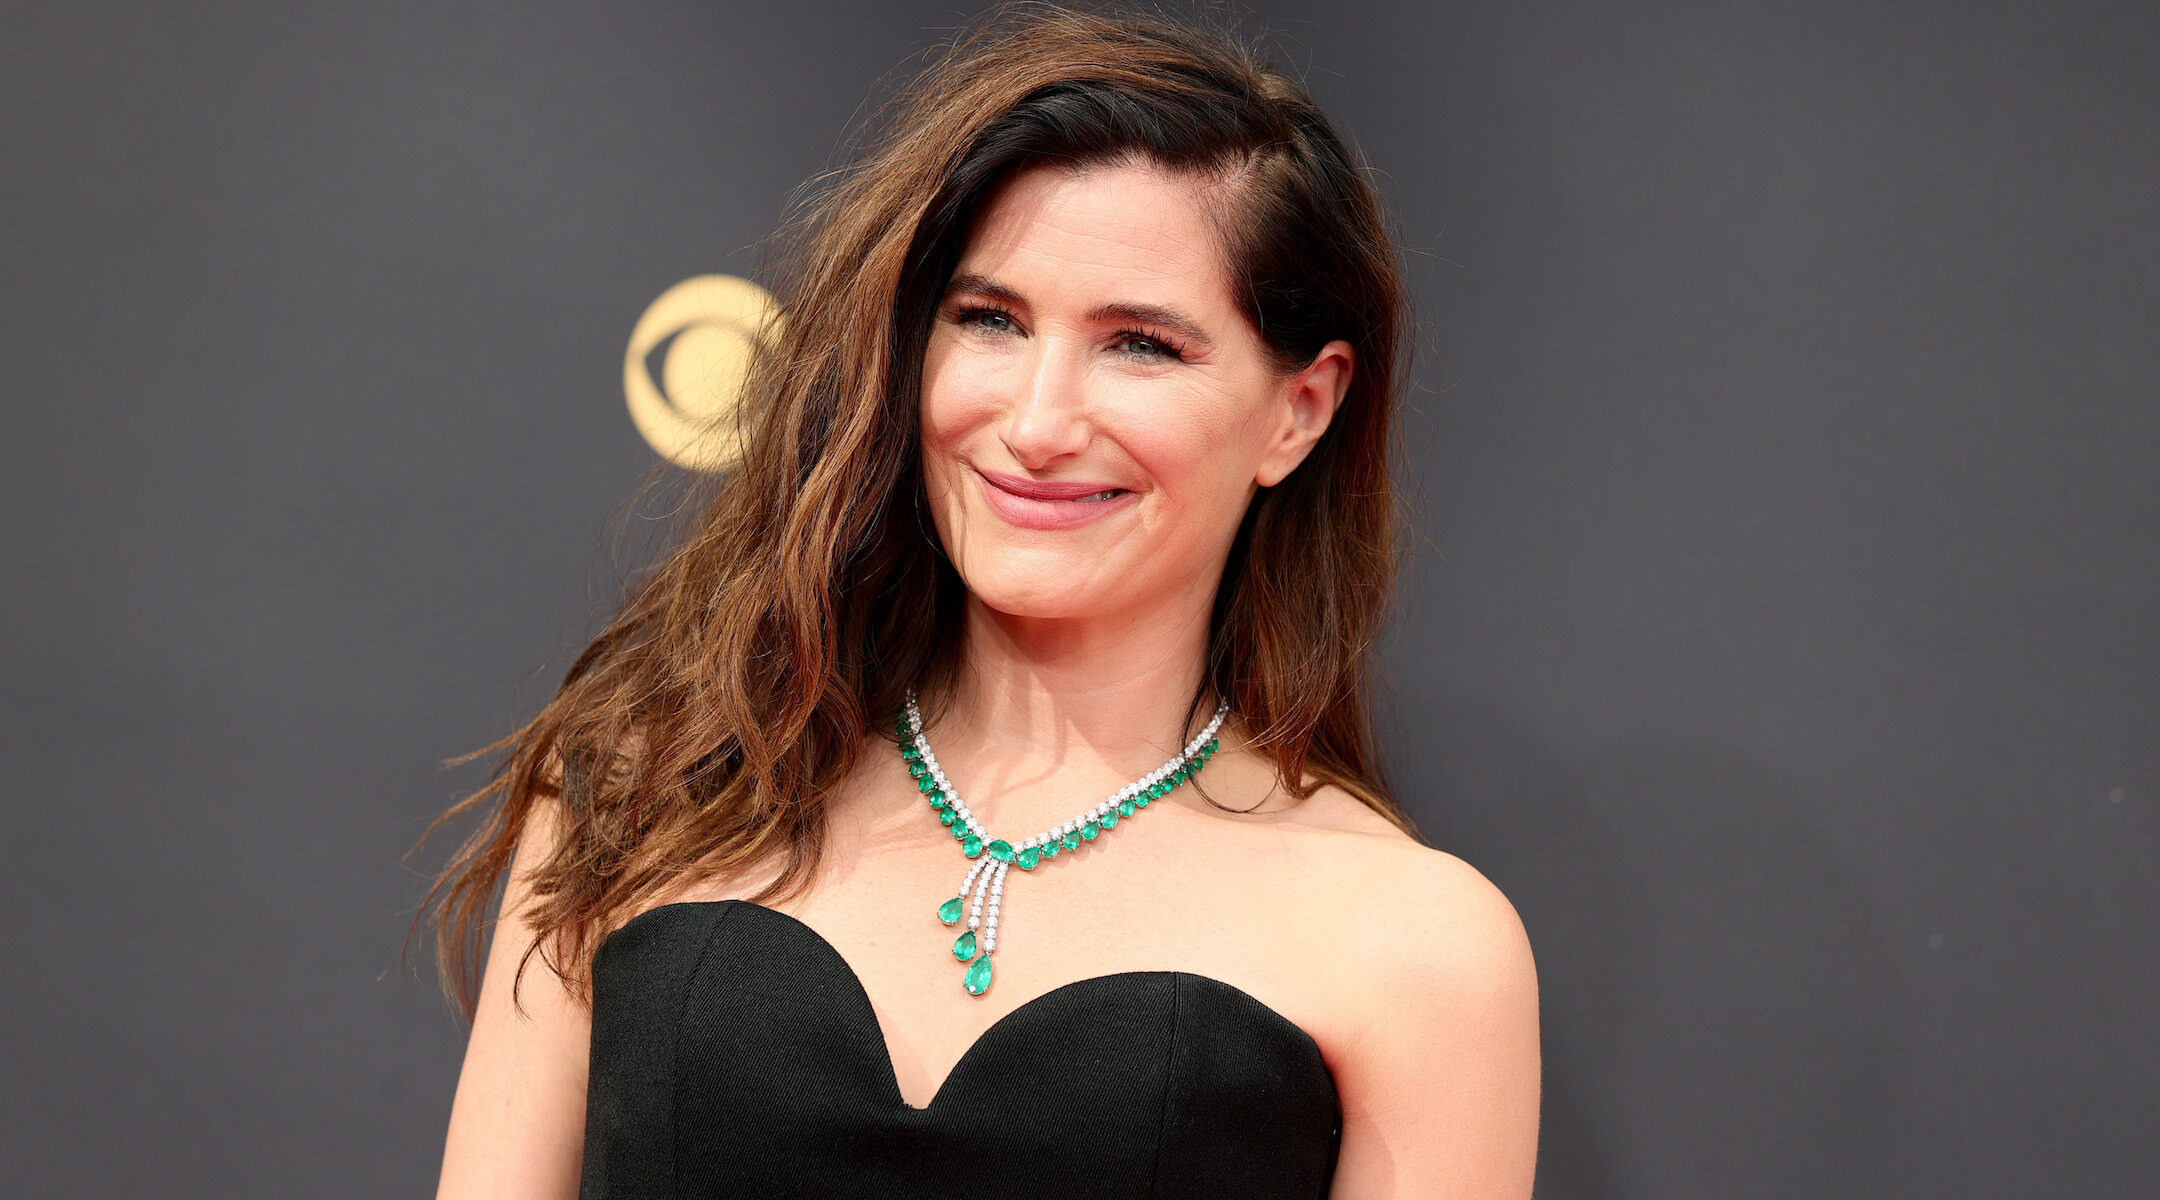 Kathryn Hahn at the Emmys